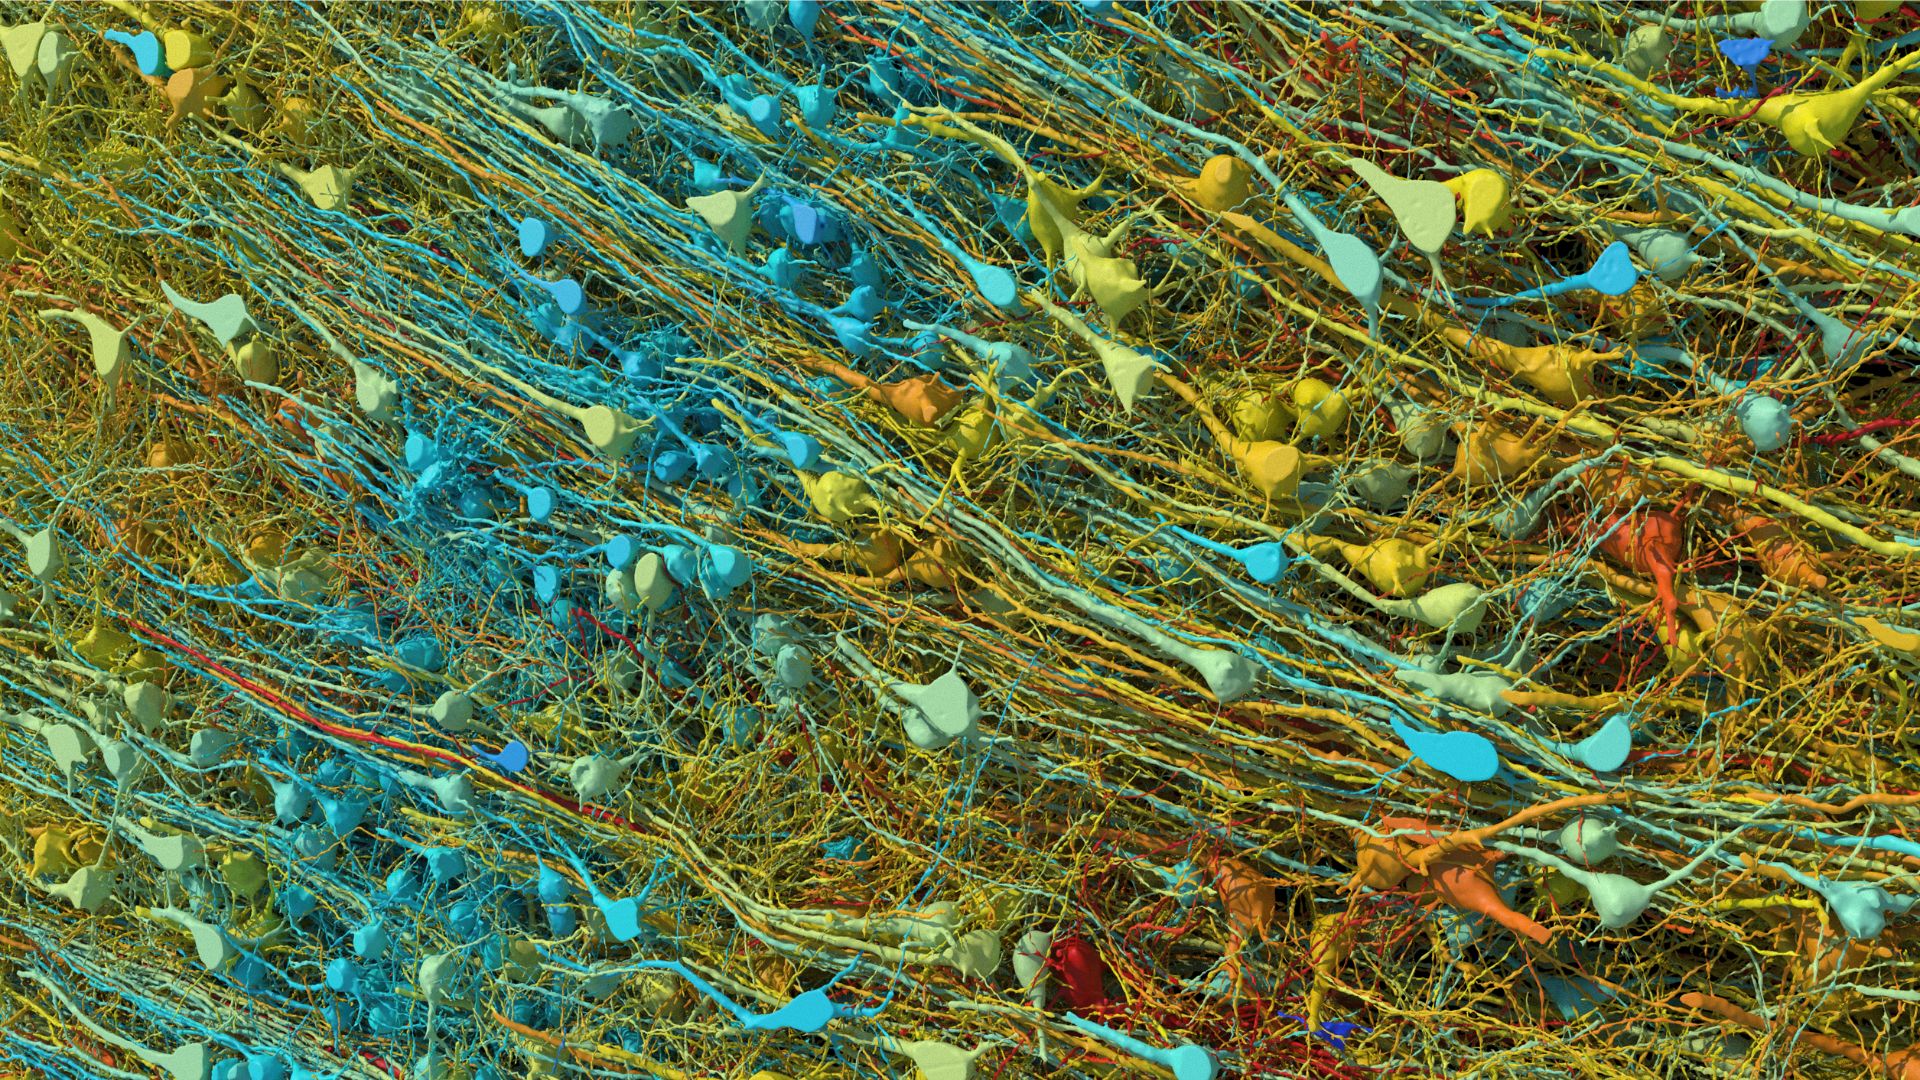 Colorful digital image of neurons connecting in a dense network